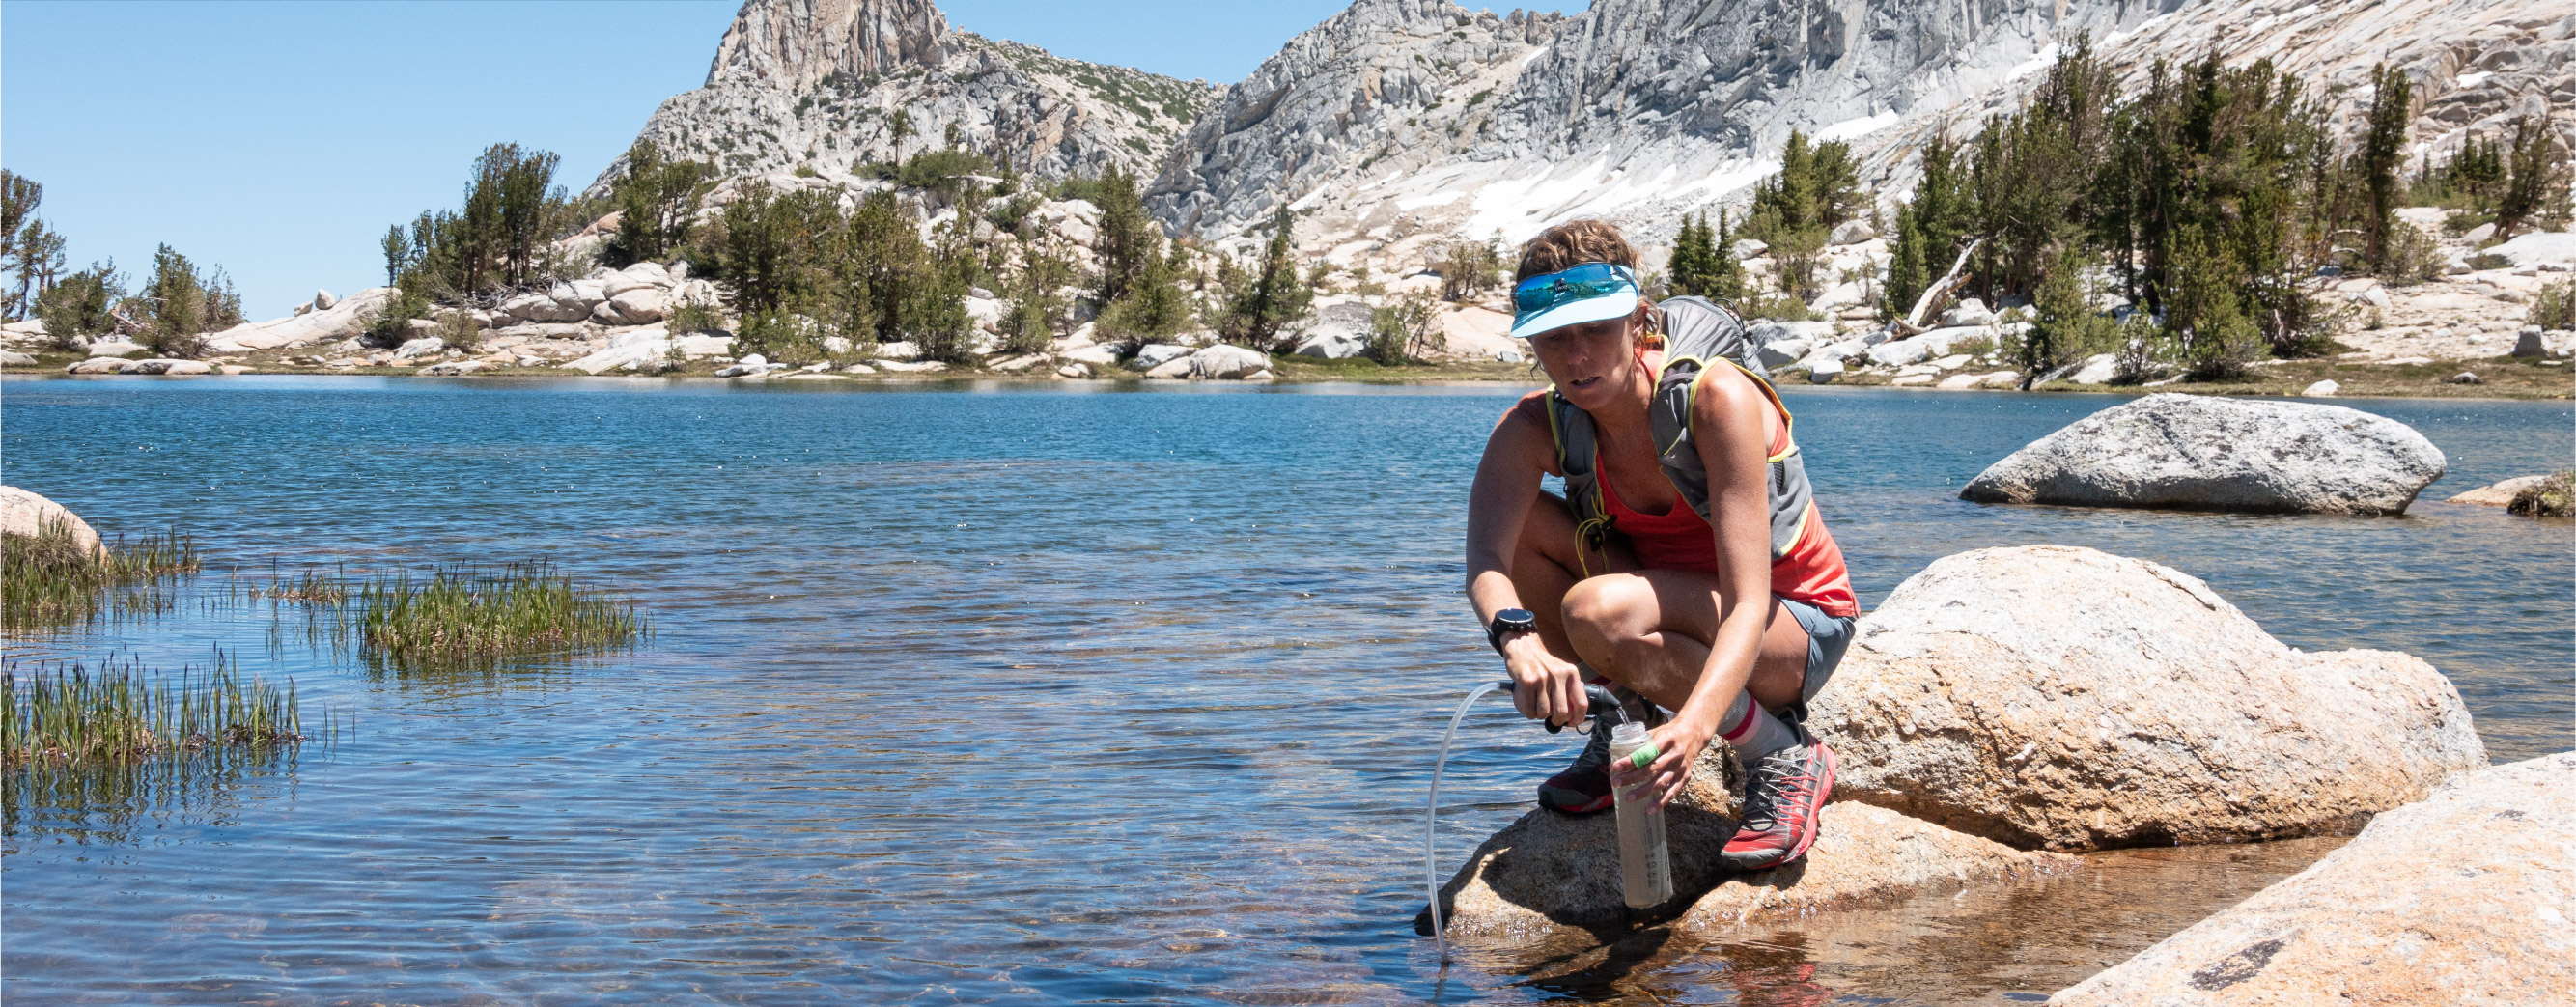 Hiking Must-Haves - Gear to help cover more miles.